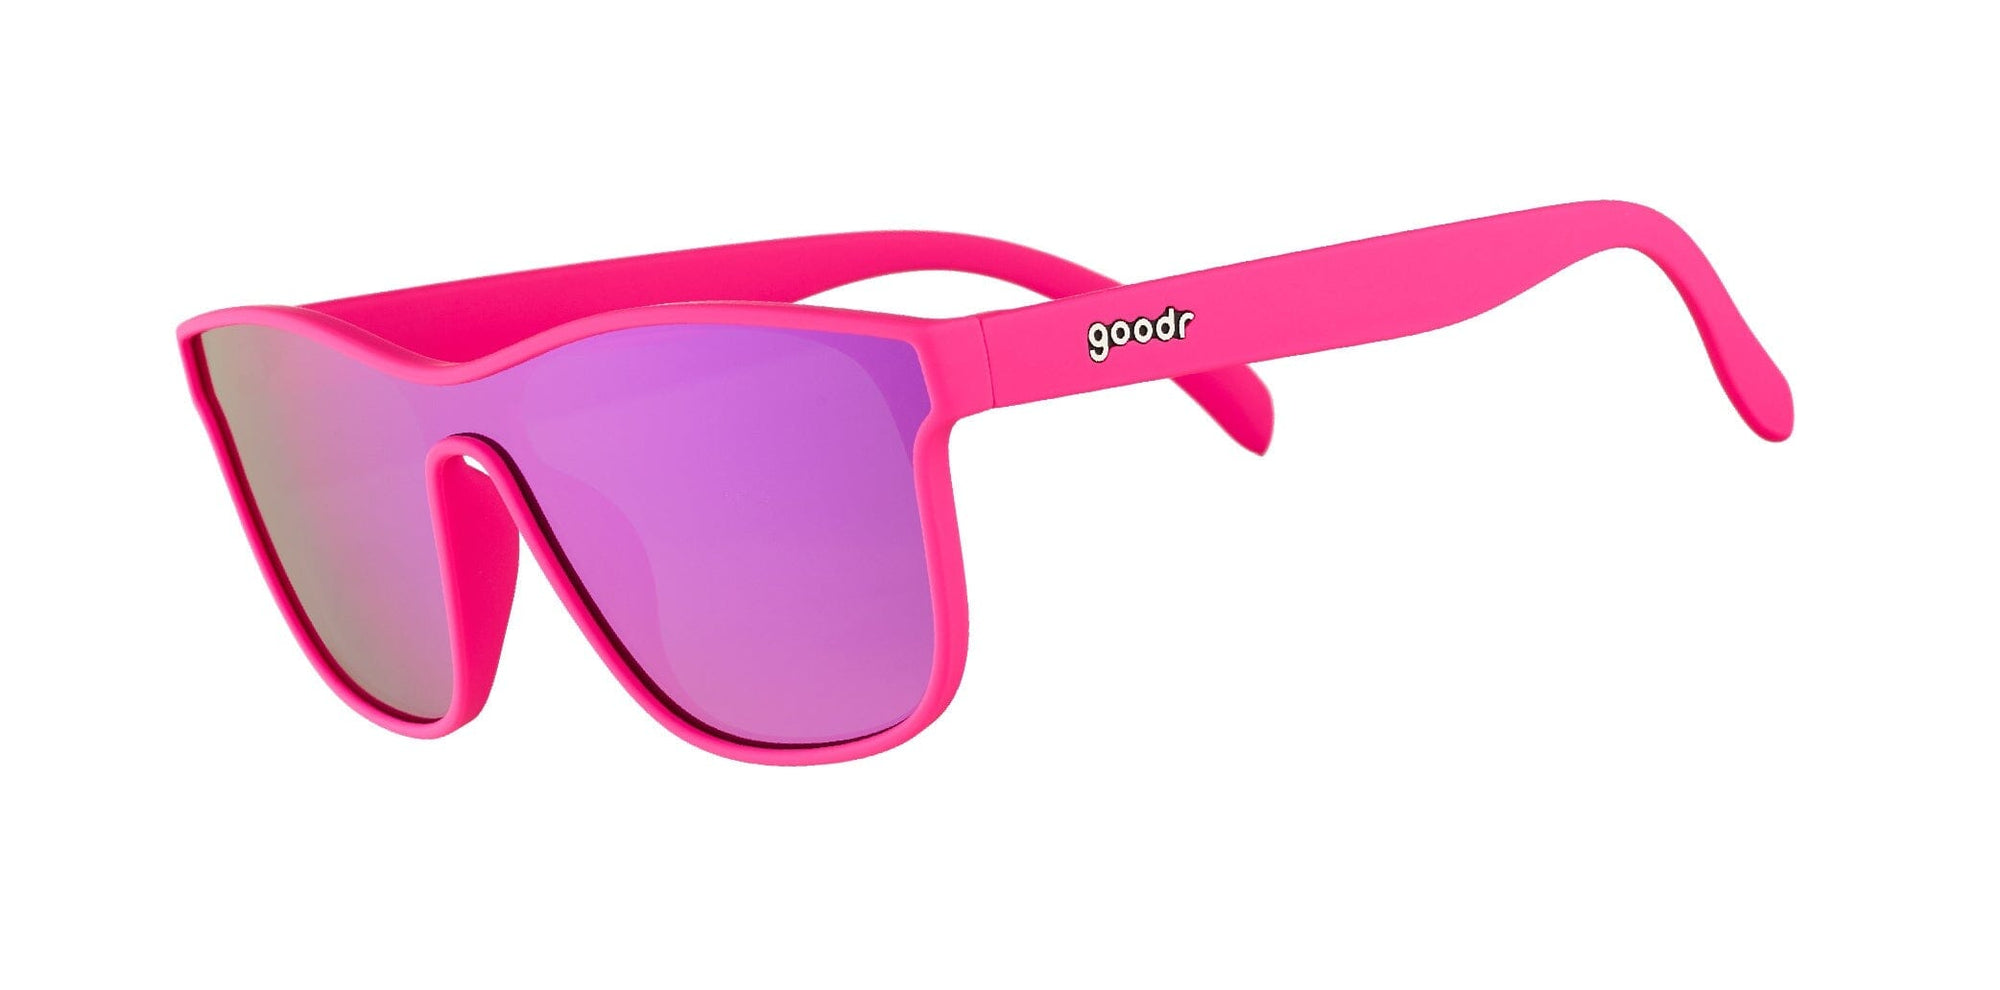 goodr VRG - Sports Sunglasses - See You at the Party, Richter! See You at the Party, Richter! OS 